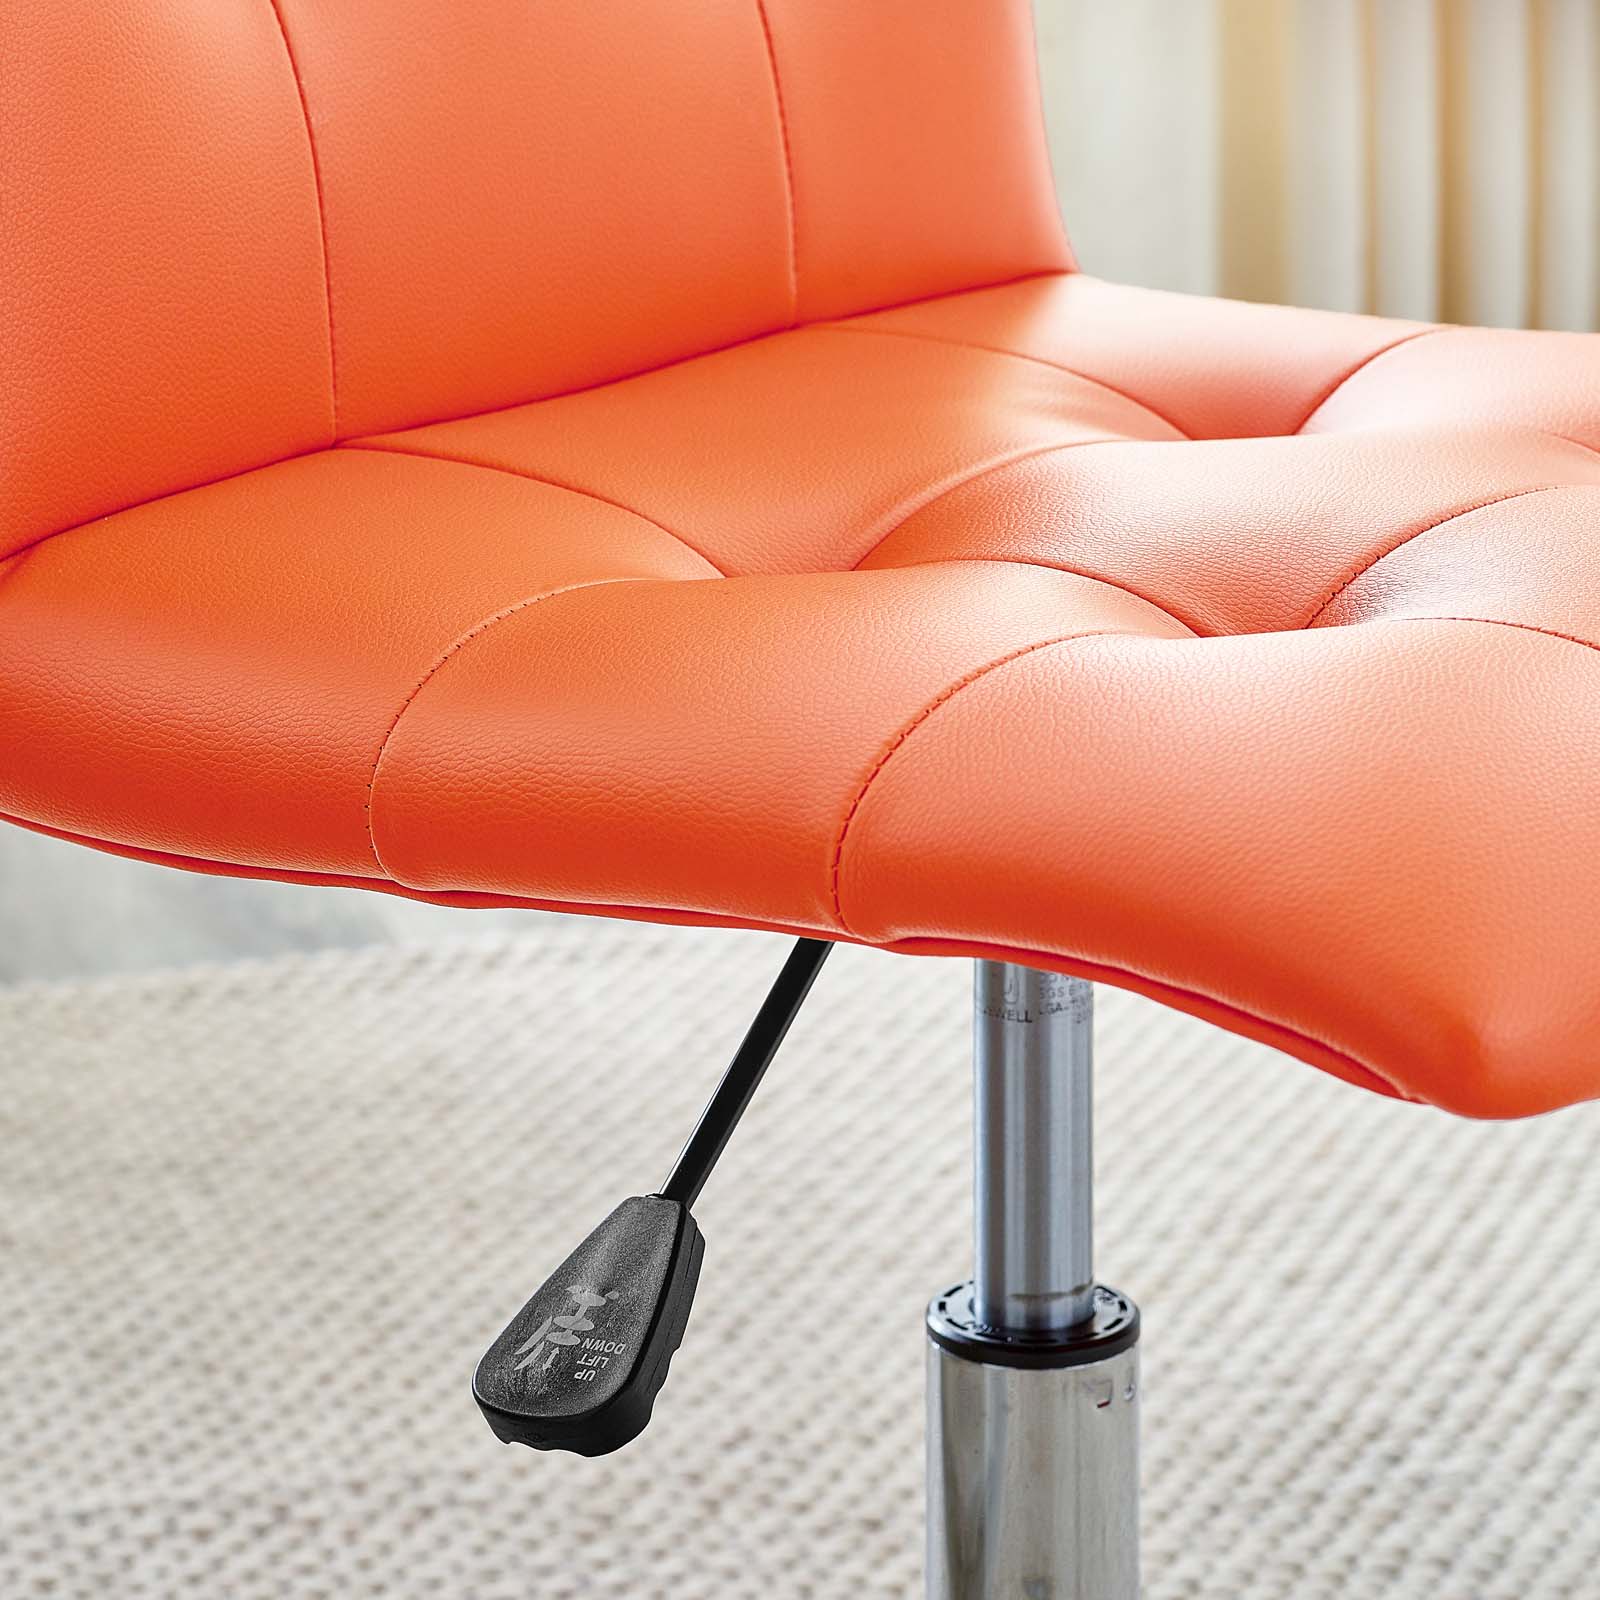 Modway Task Chairs - Prim Armless Mid Back Office Chair Orange